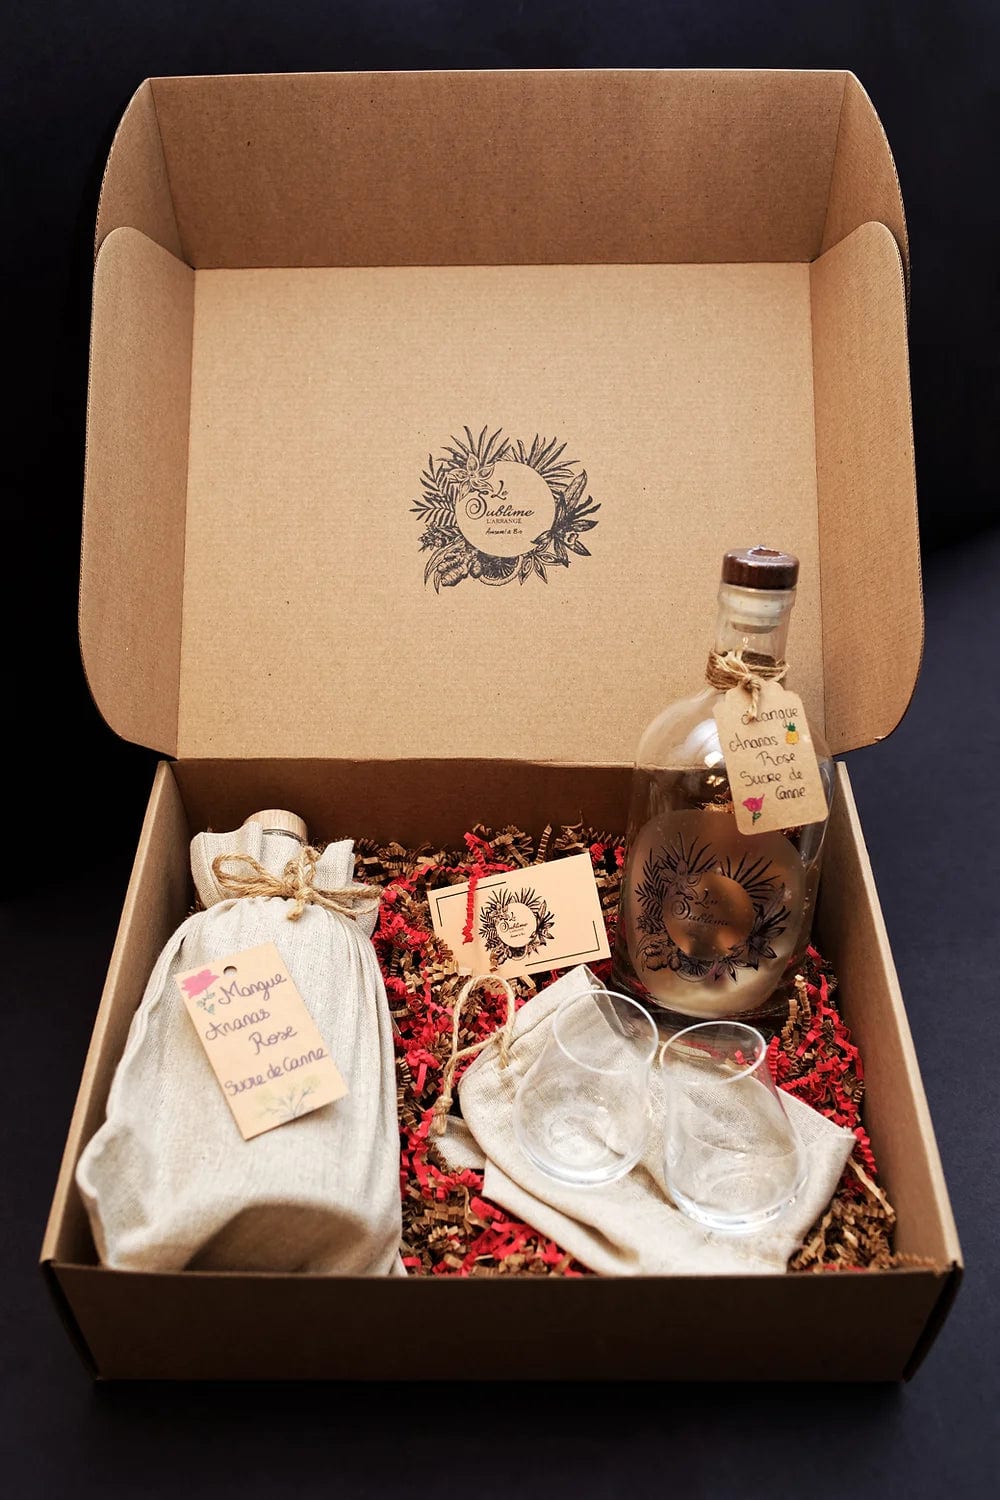 THE SUBLIME gift box